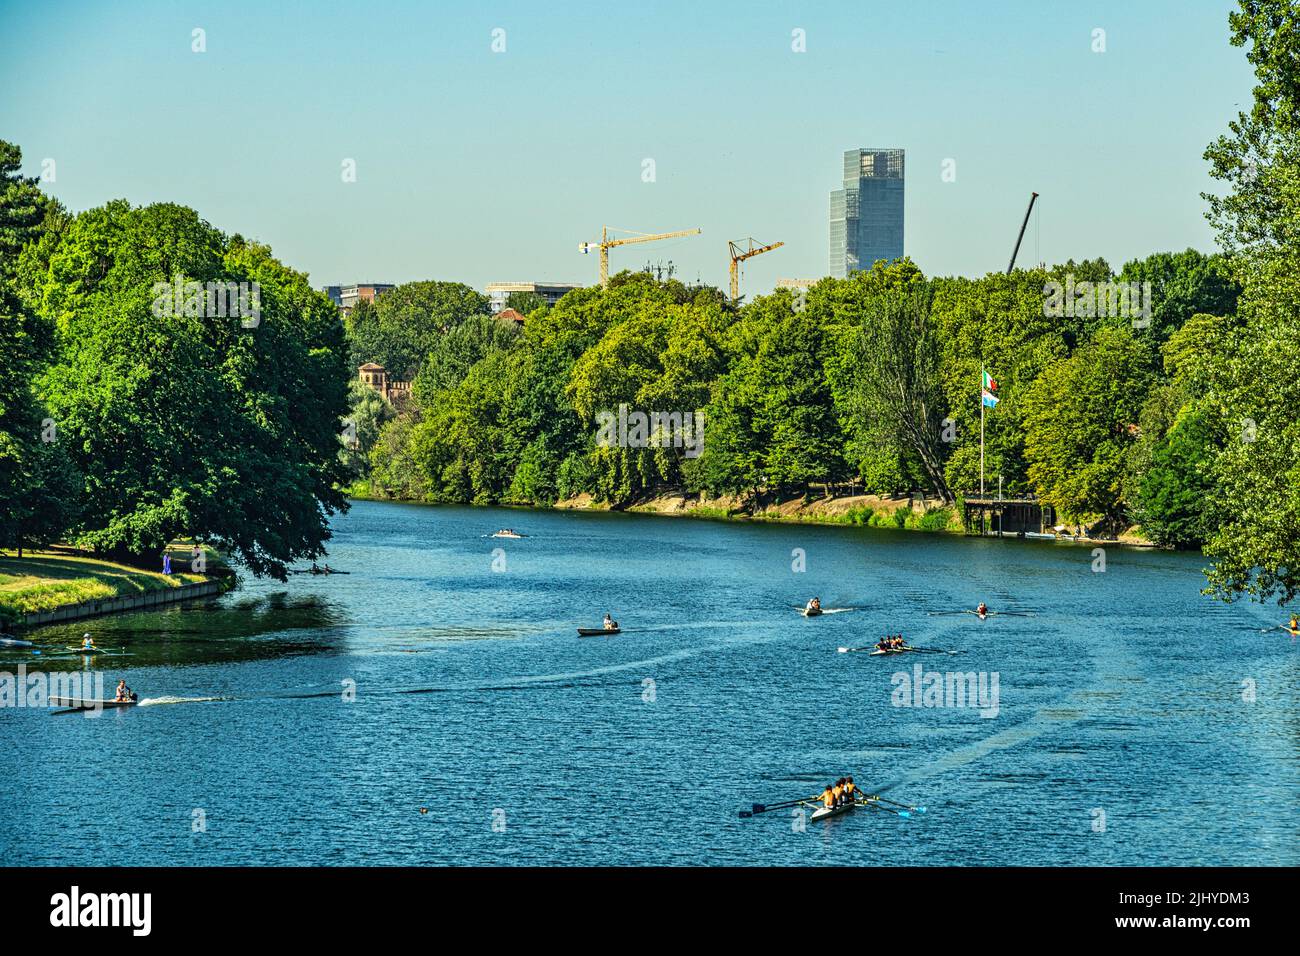 Rowing sports on the Po river in the early summer morning, with the Intesa Sanpaolo skyscraper in the background. Turin,Turin province,Piedmont,Italy Stock Photo